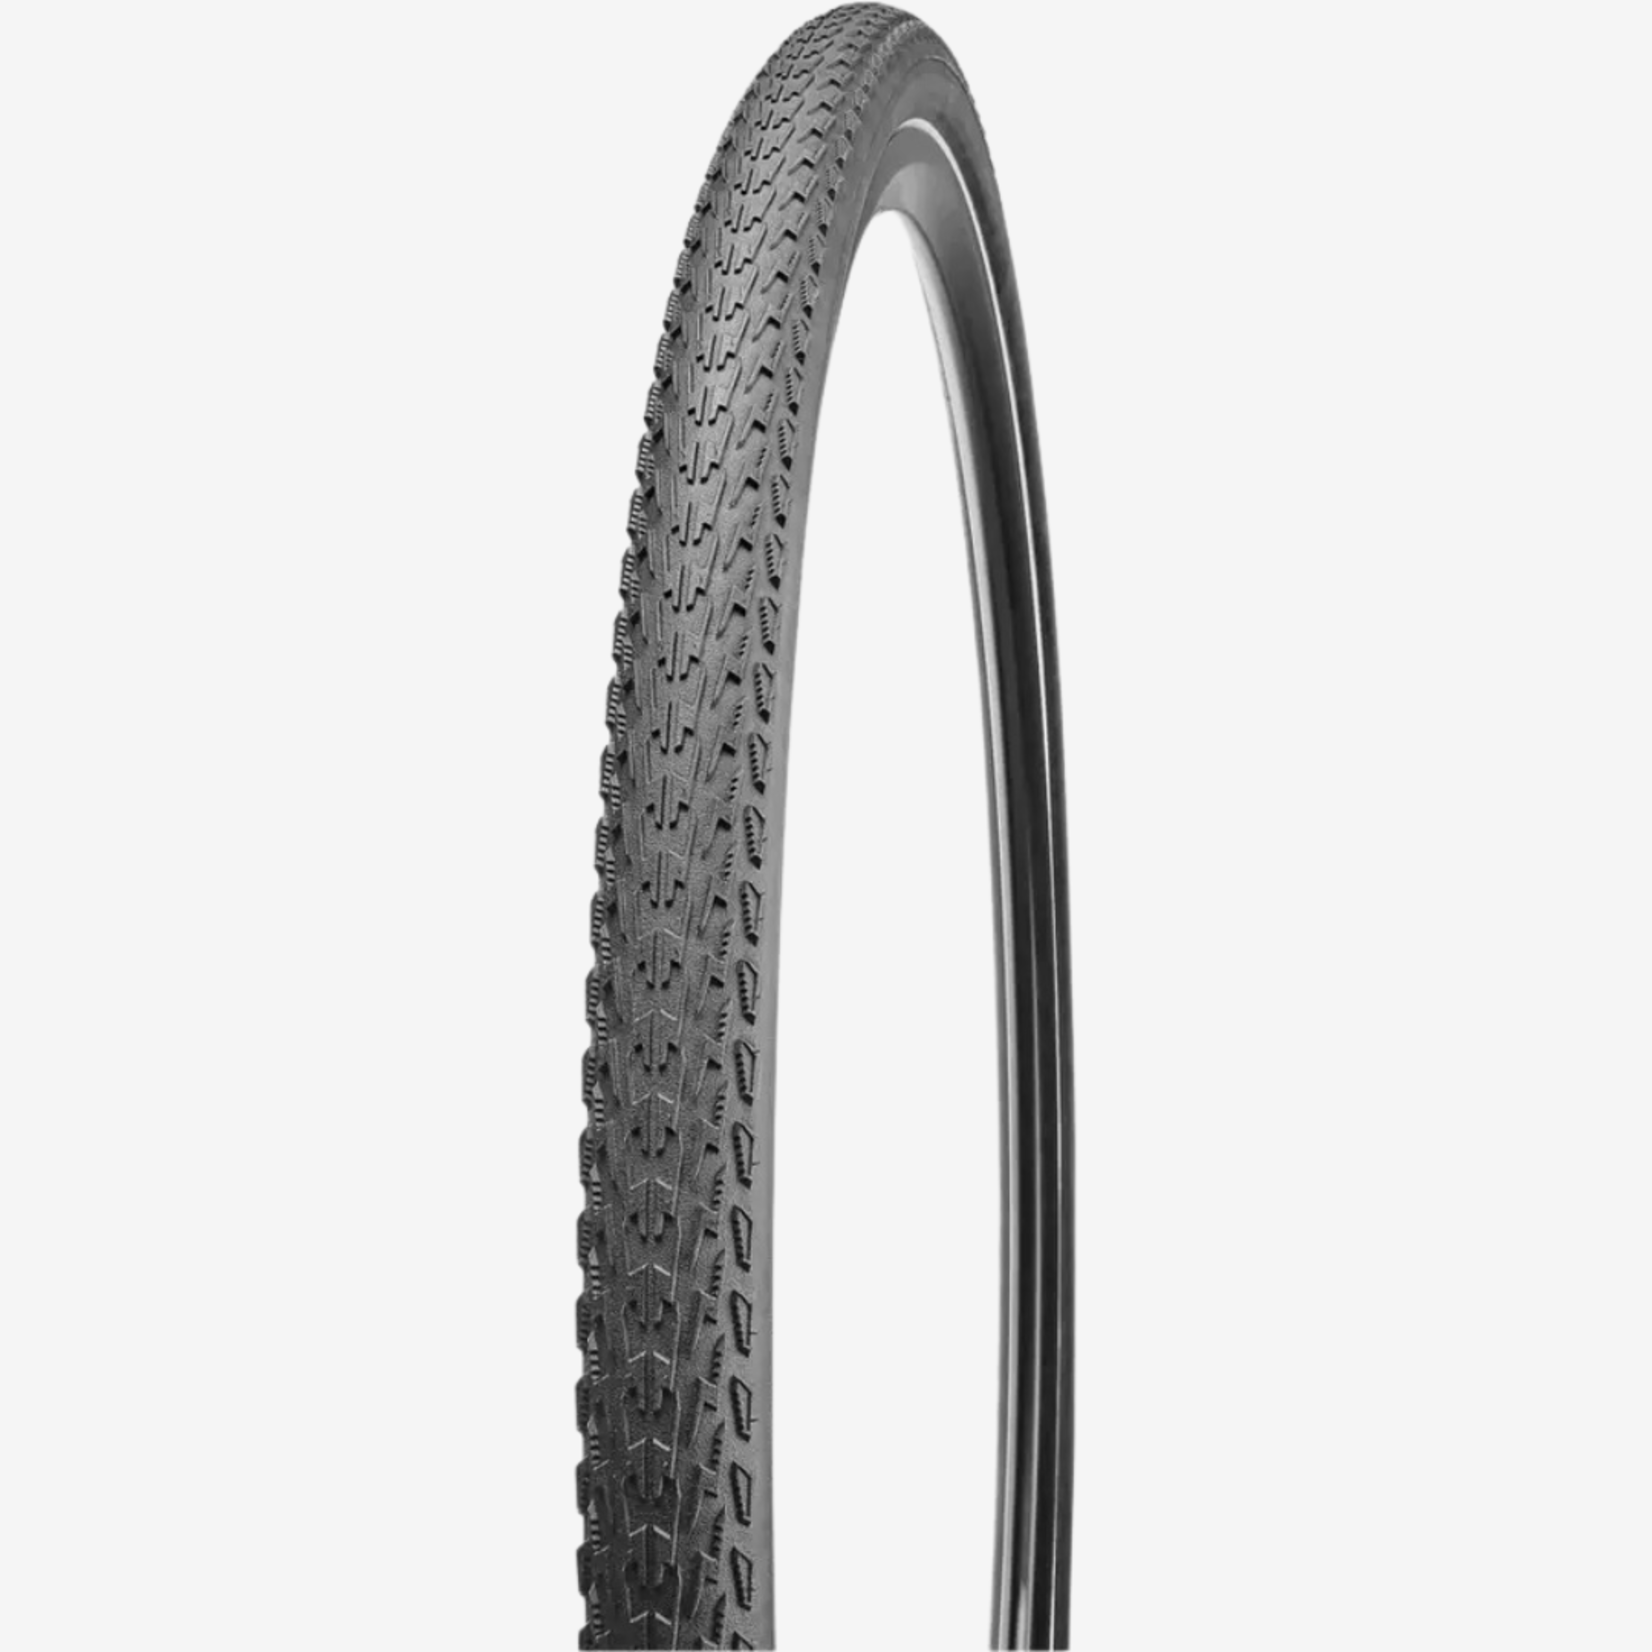 SPECIALIZED TRACER PRO 2BLISS READY GRAVEL TIRE